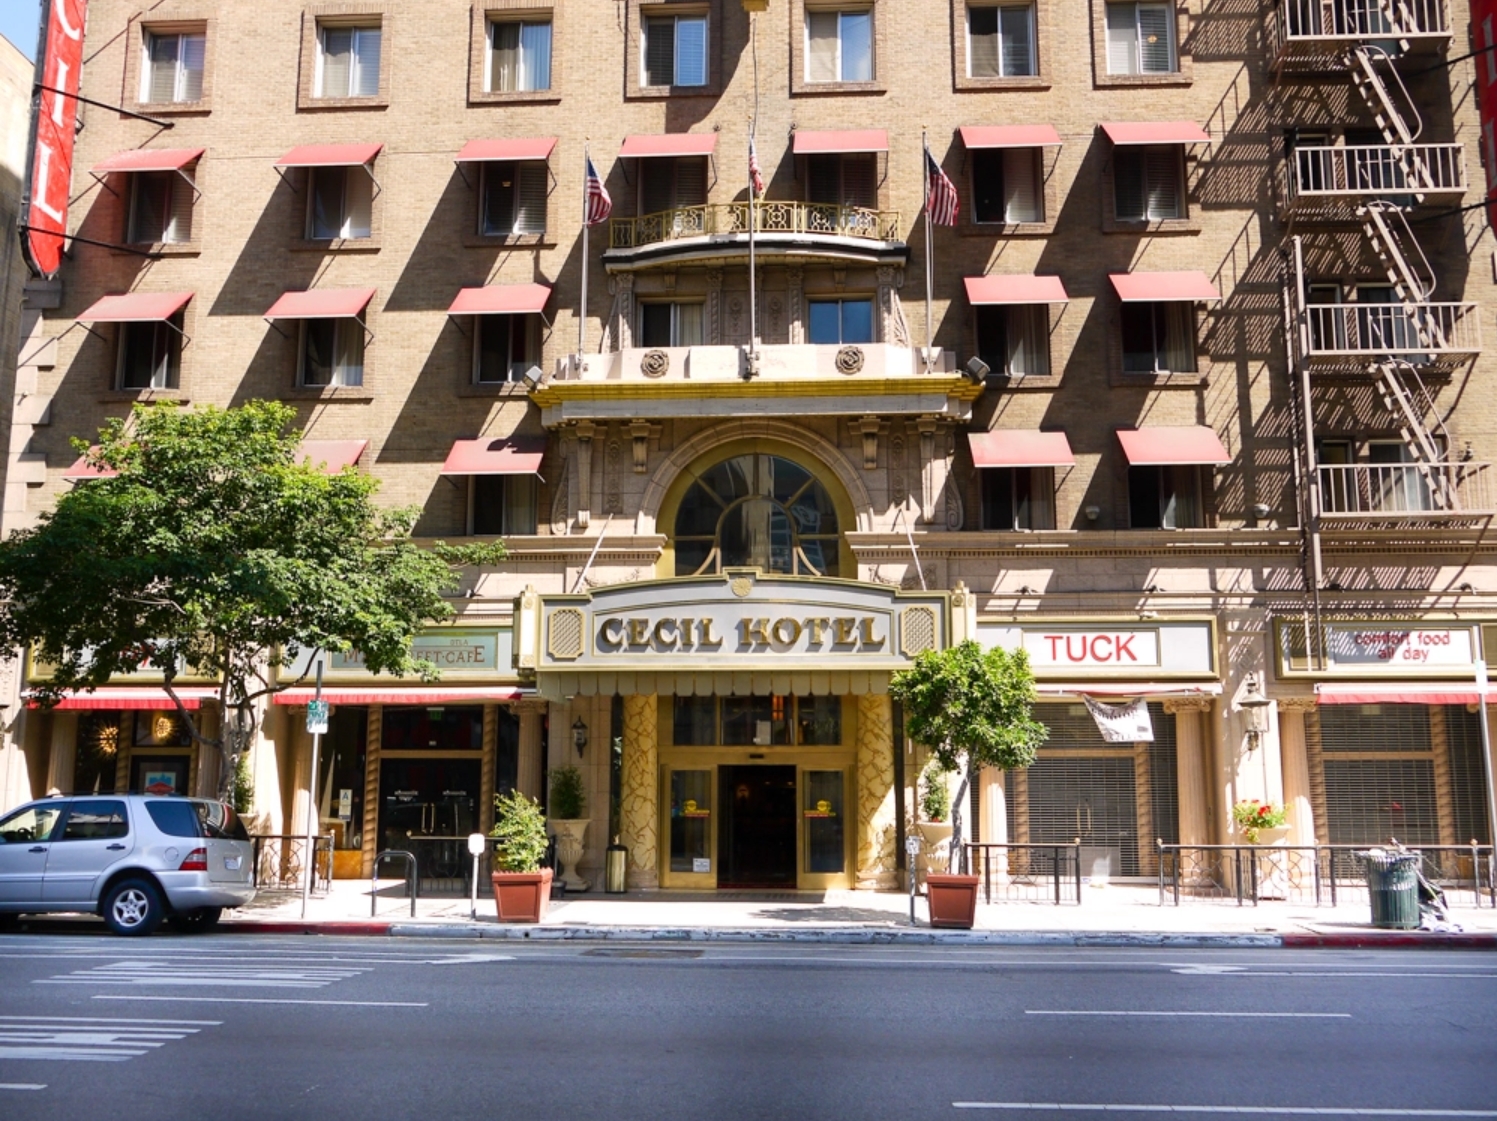 The Cecil Hotel from â€œCrime Scene: The Vanishing at the Cecil Hotel ...